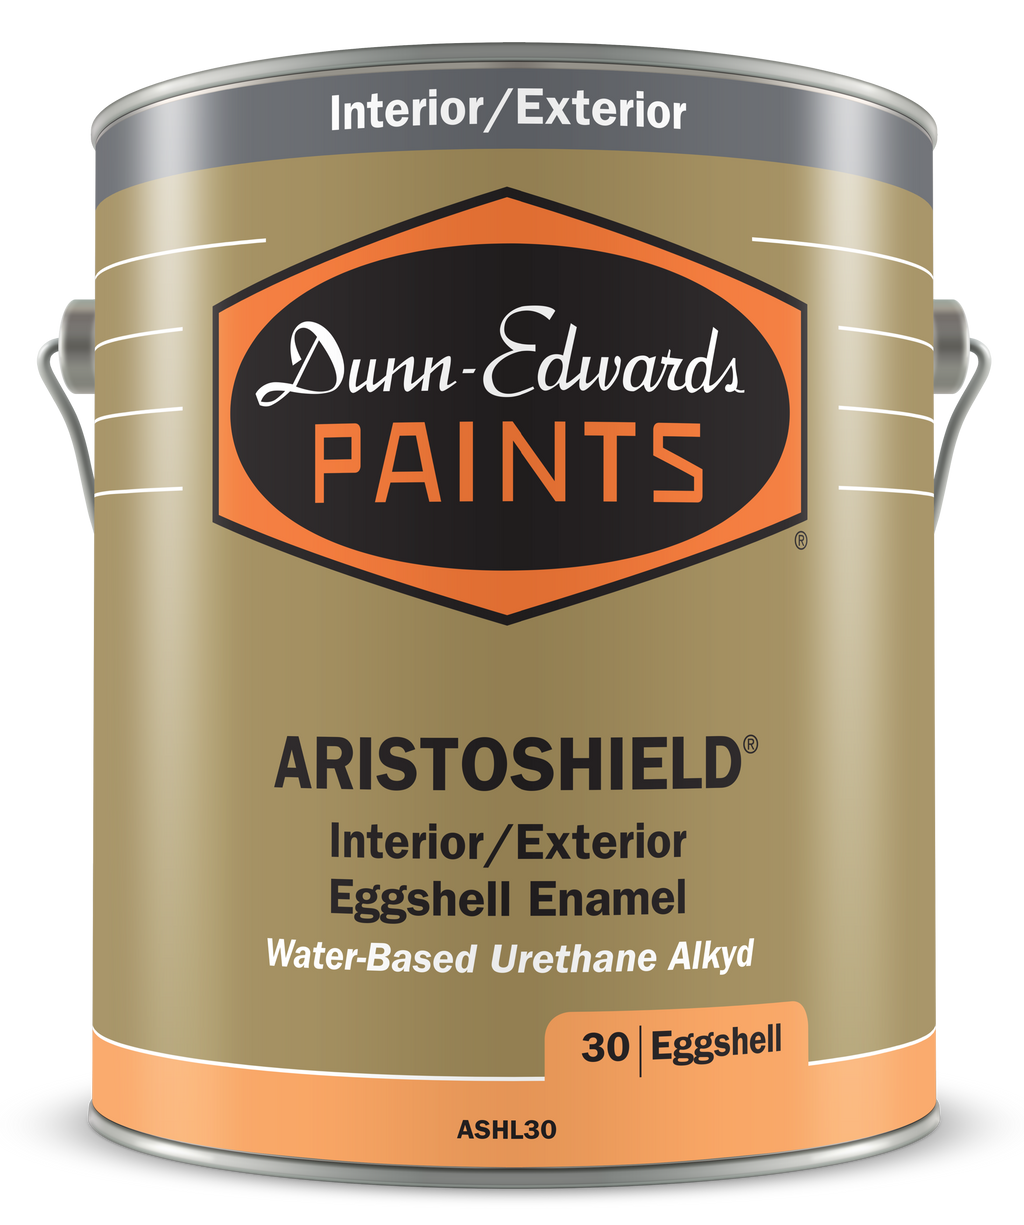 Striking - Lustrous Metallic Emulsion - Crafted™ By Crown